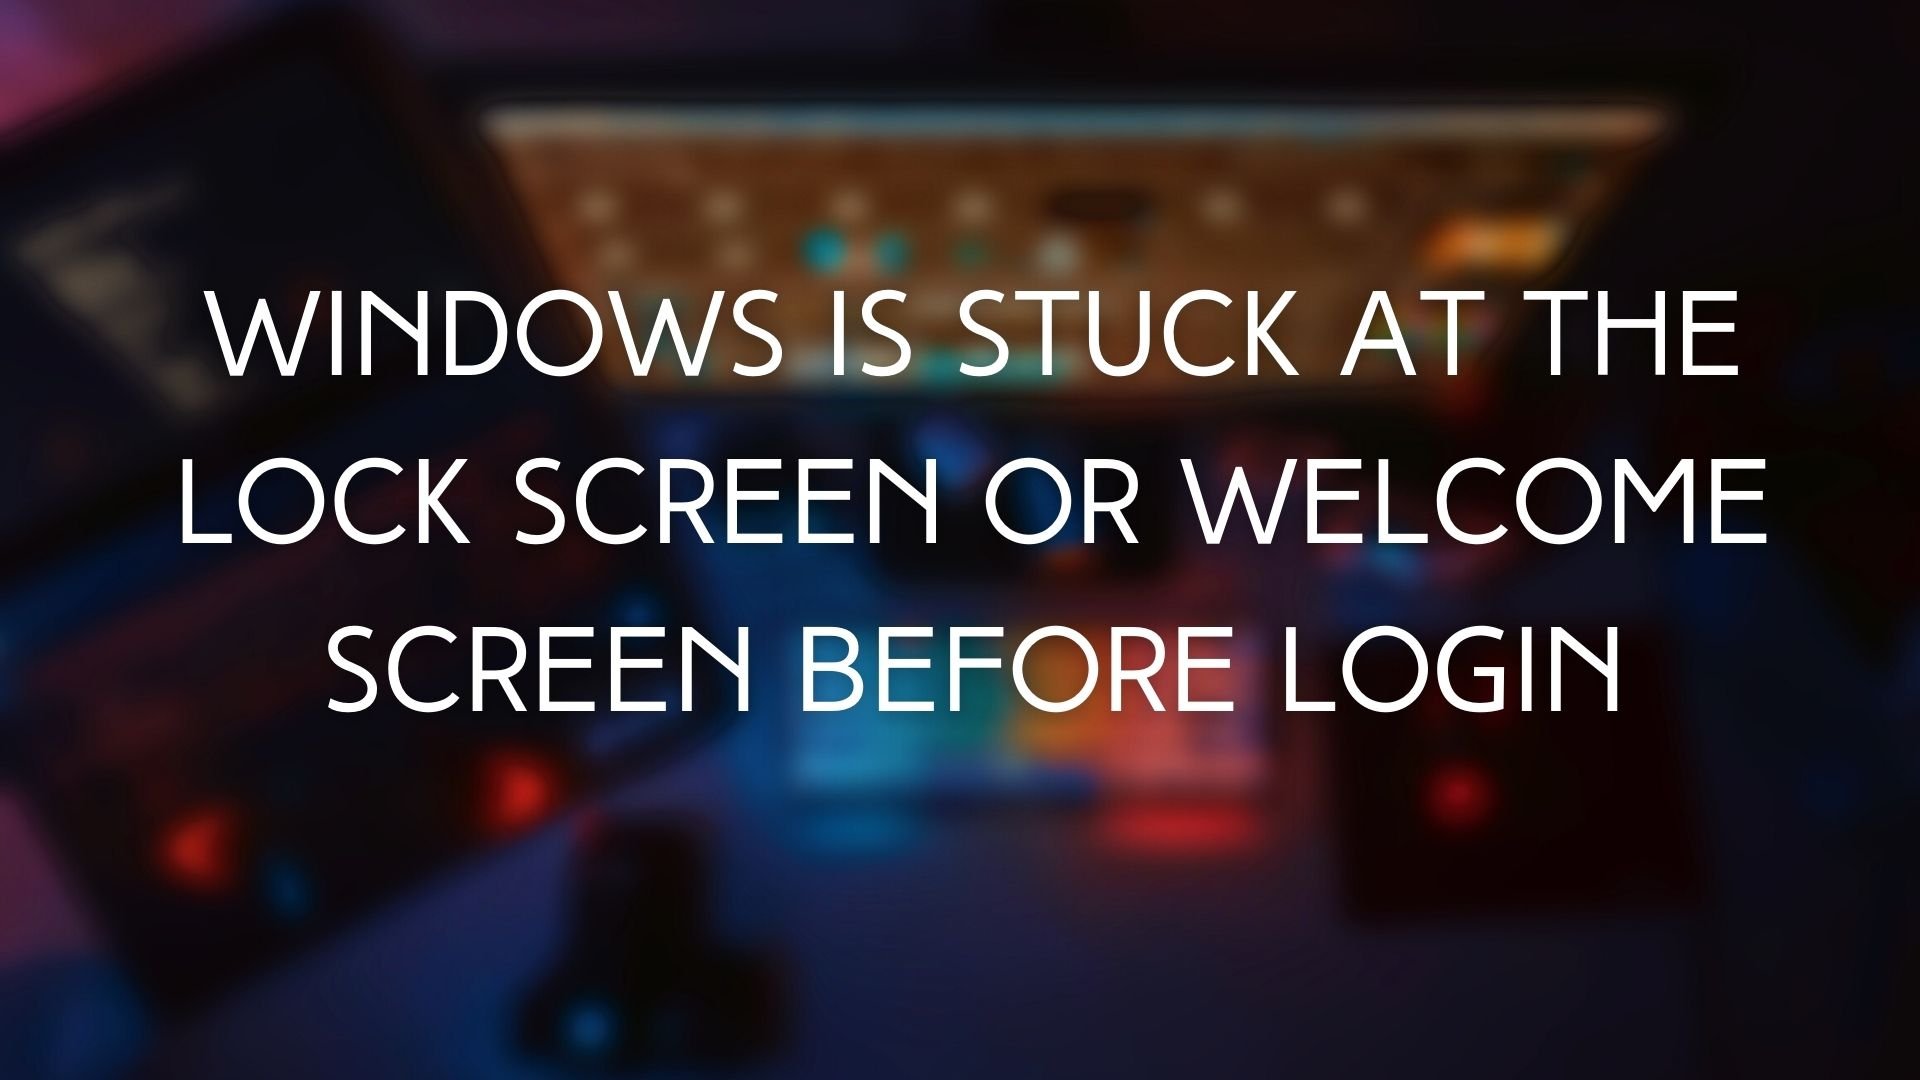 Windows is stuck at the Lock Screen or Welcome Screen before login Windows-Is-Stuck-At-The-Lock-Screen-Or-Welcome-Screen.jpg